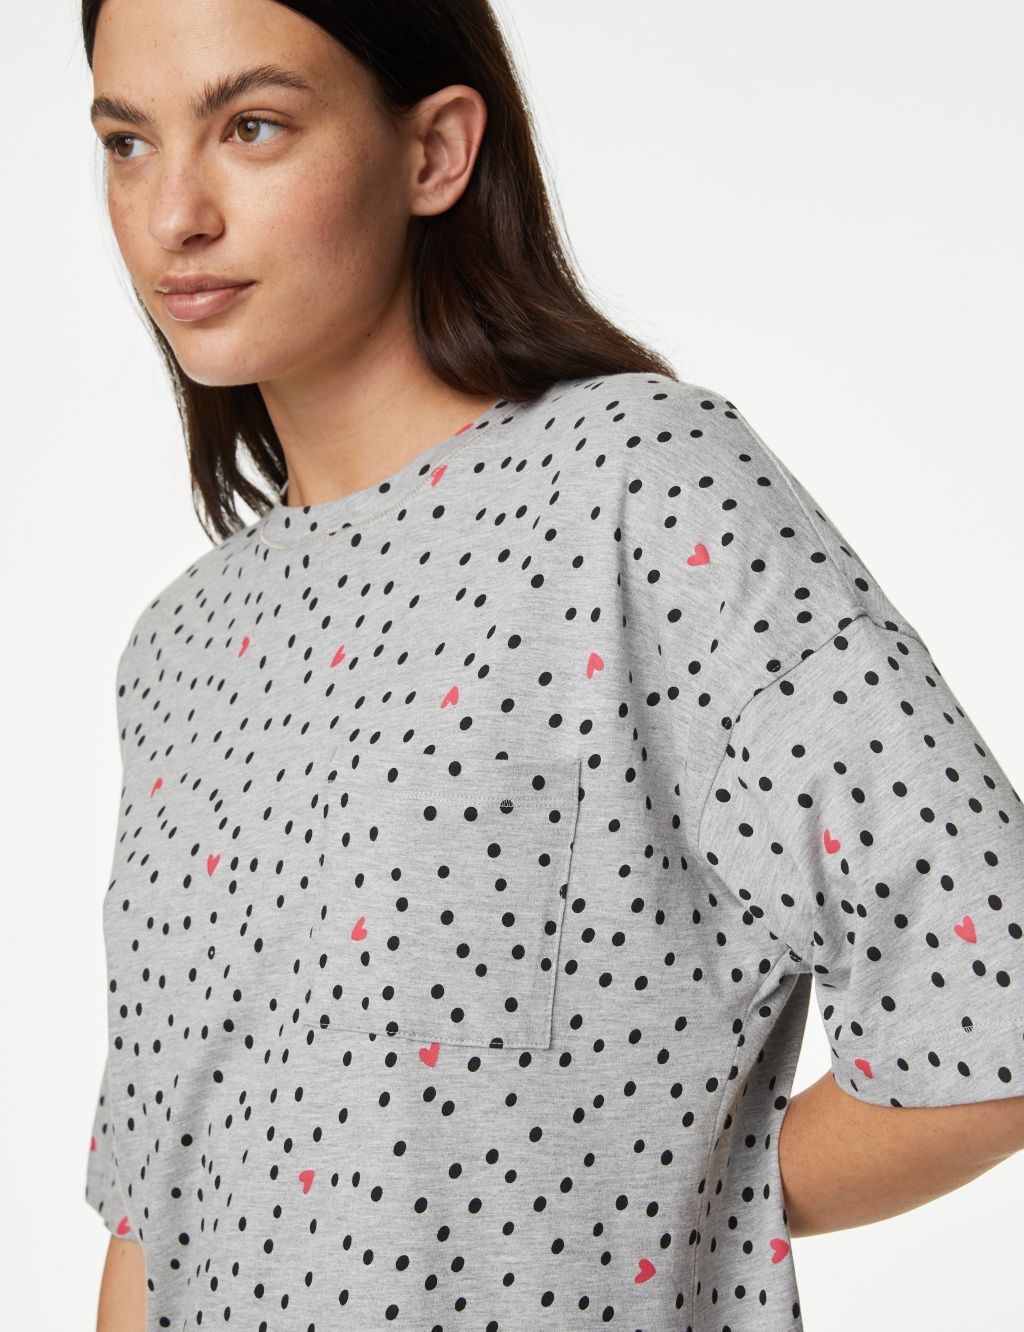 Cotton Modal Printed Nightshirt | M&S Collection | M&S